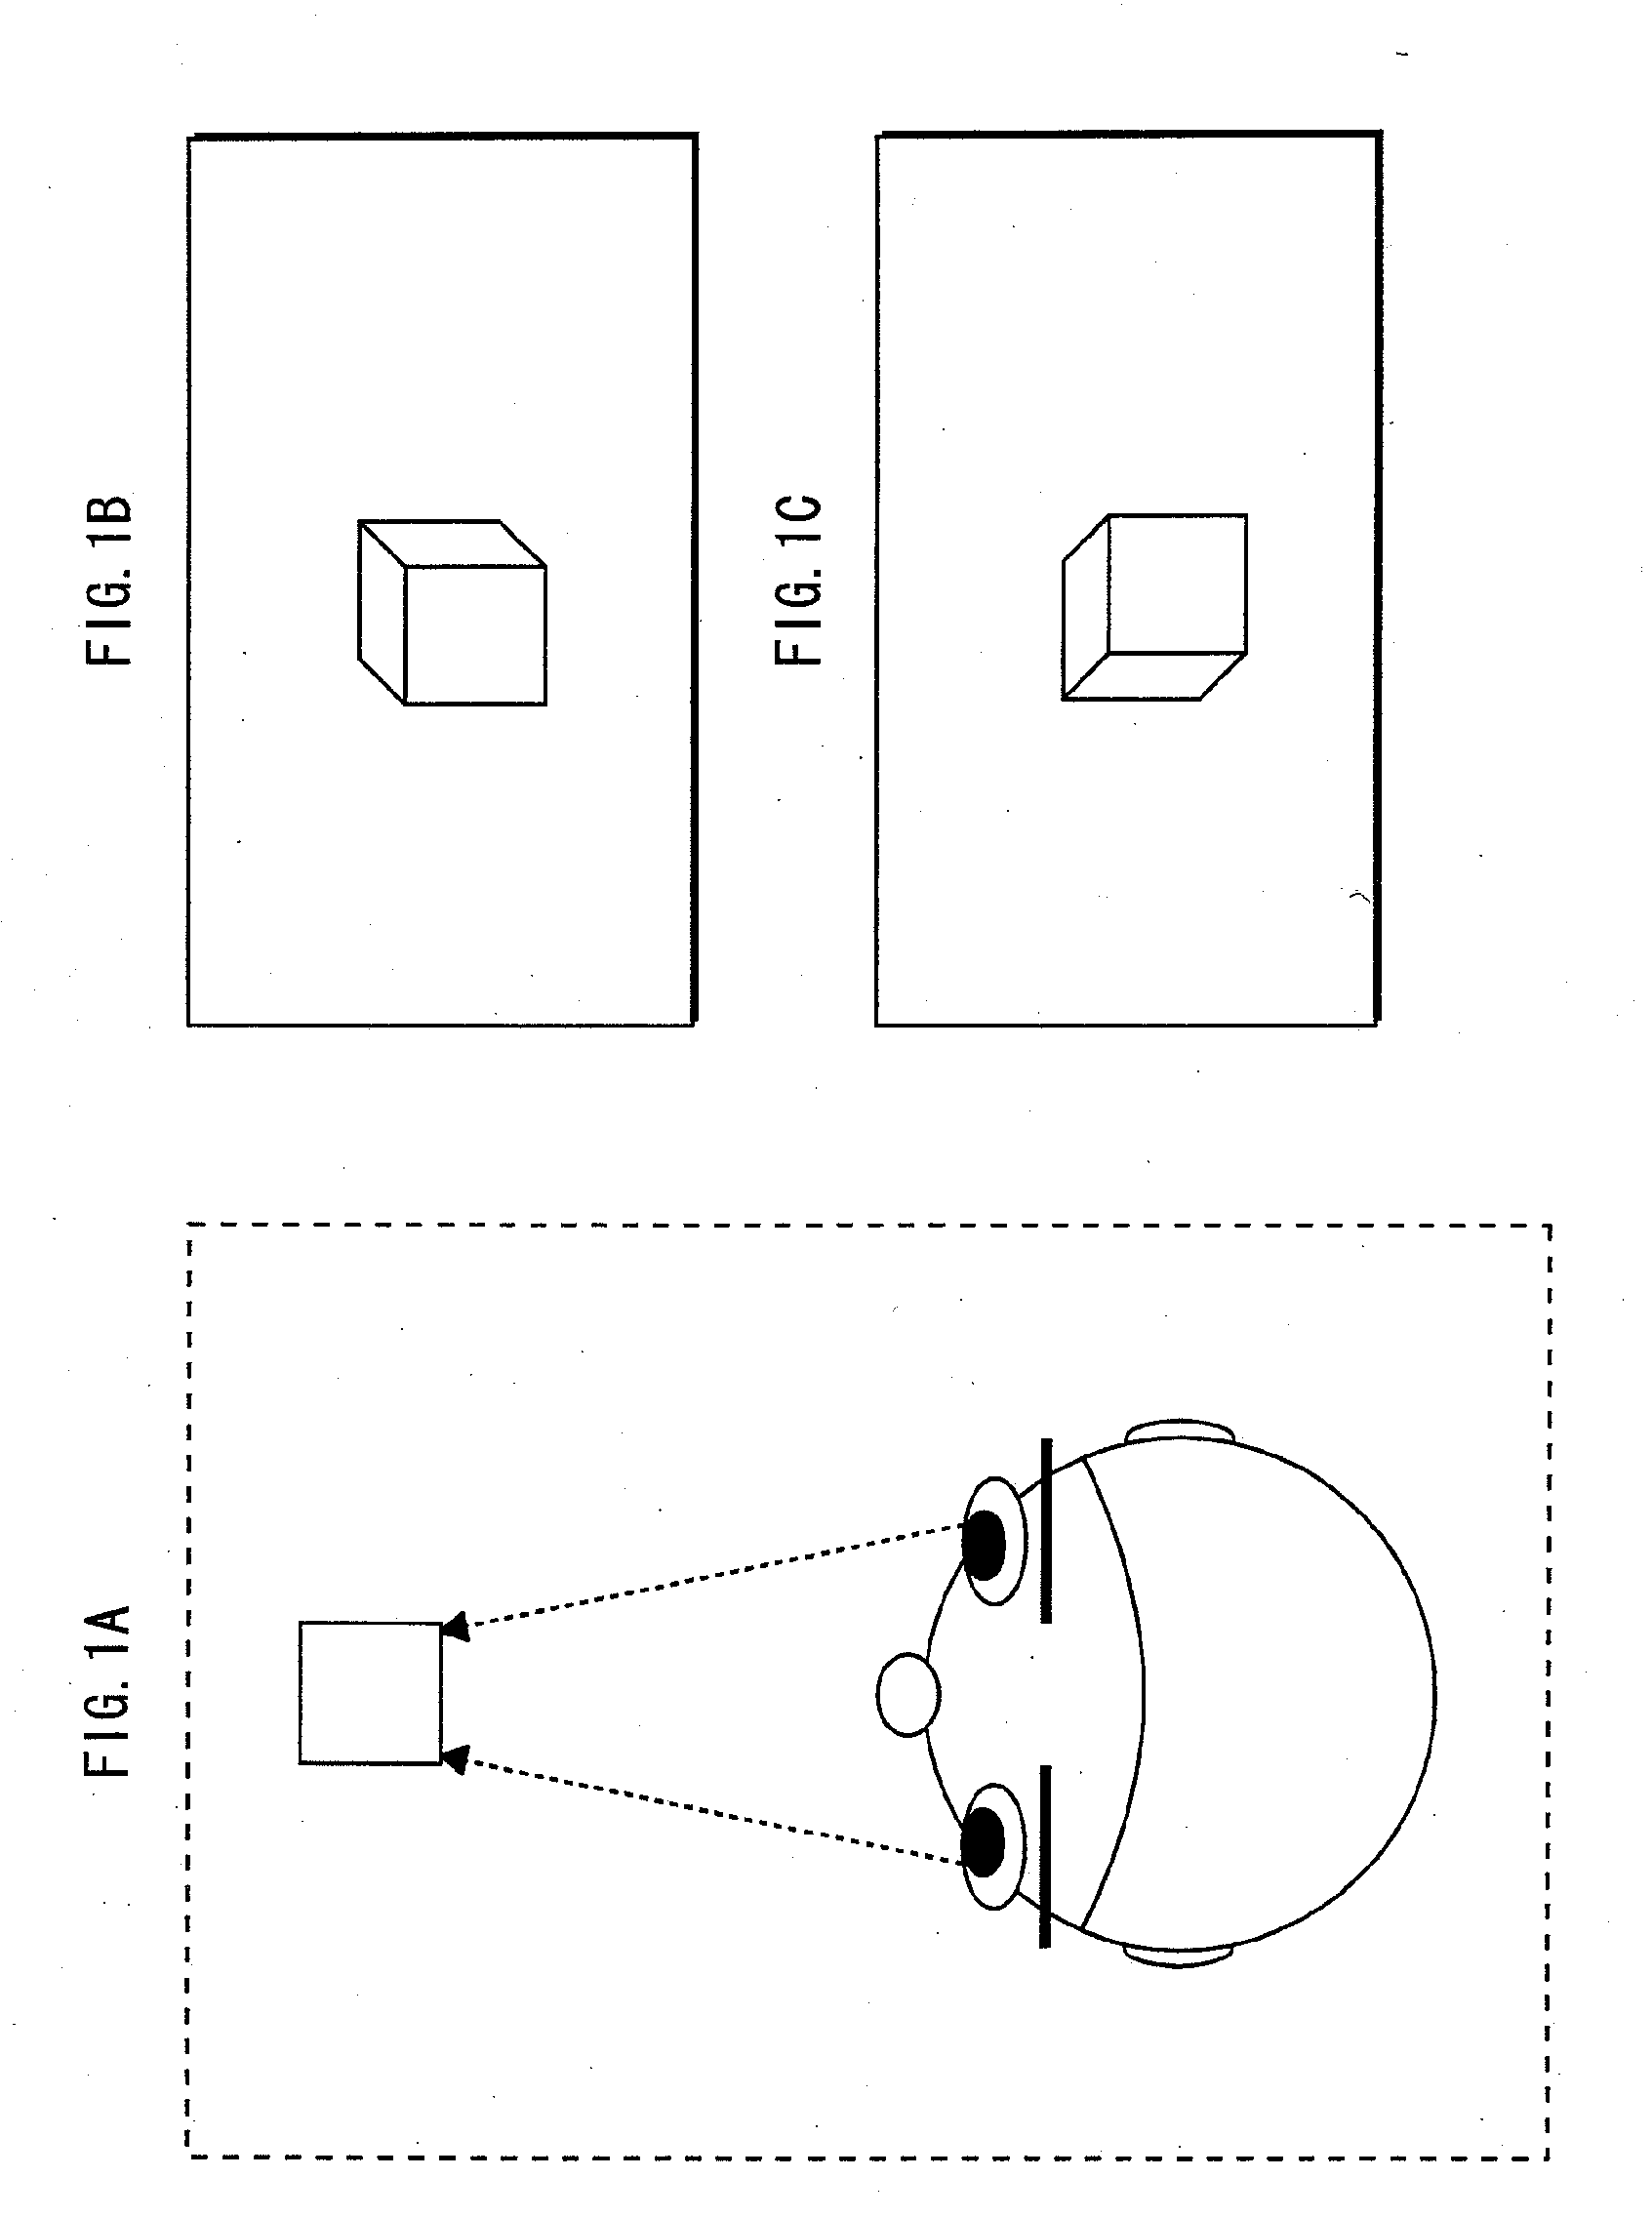 Information recording medium, device and method for playing back 3D images